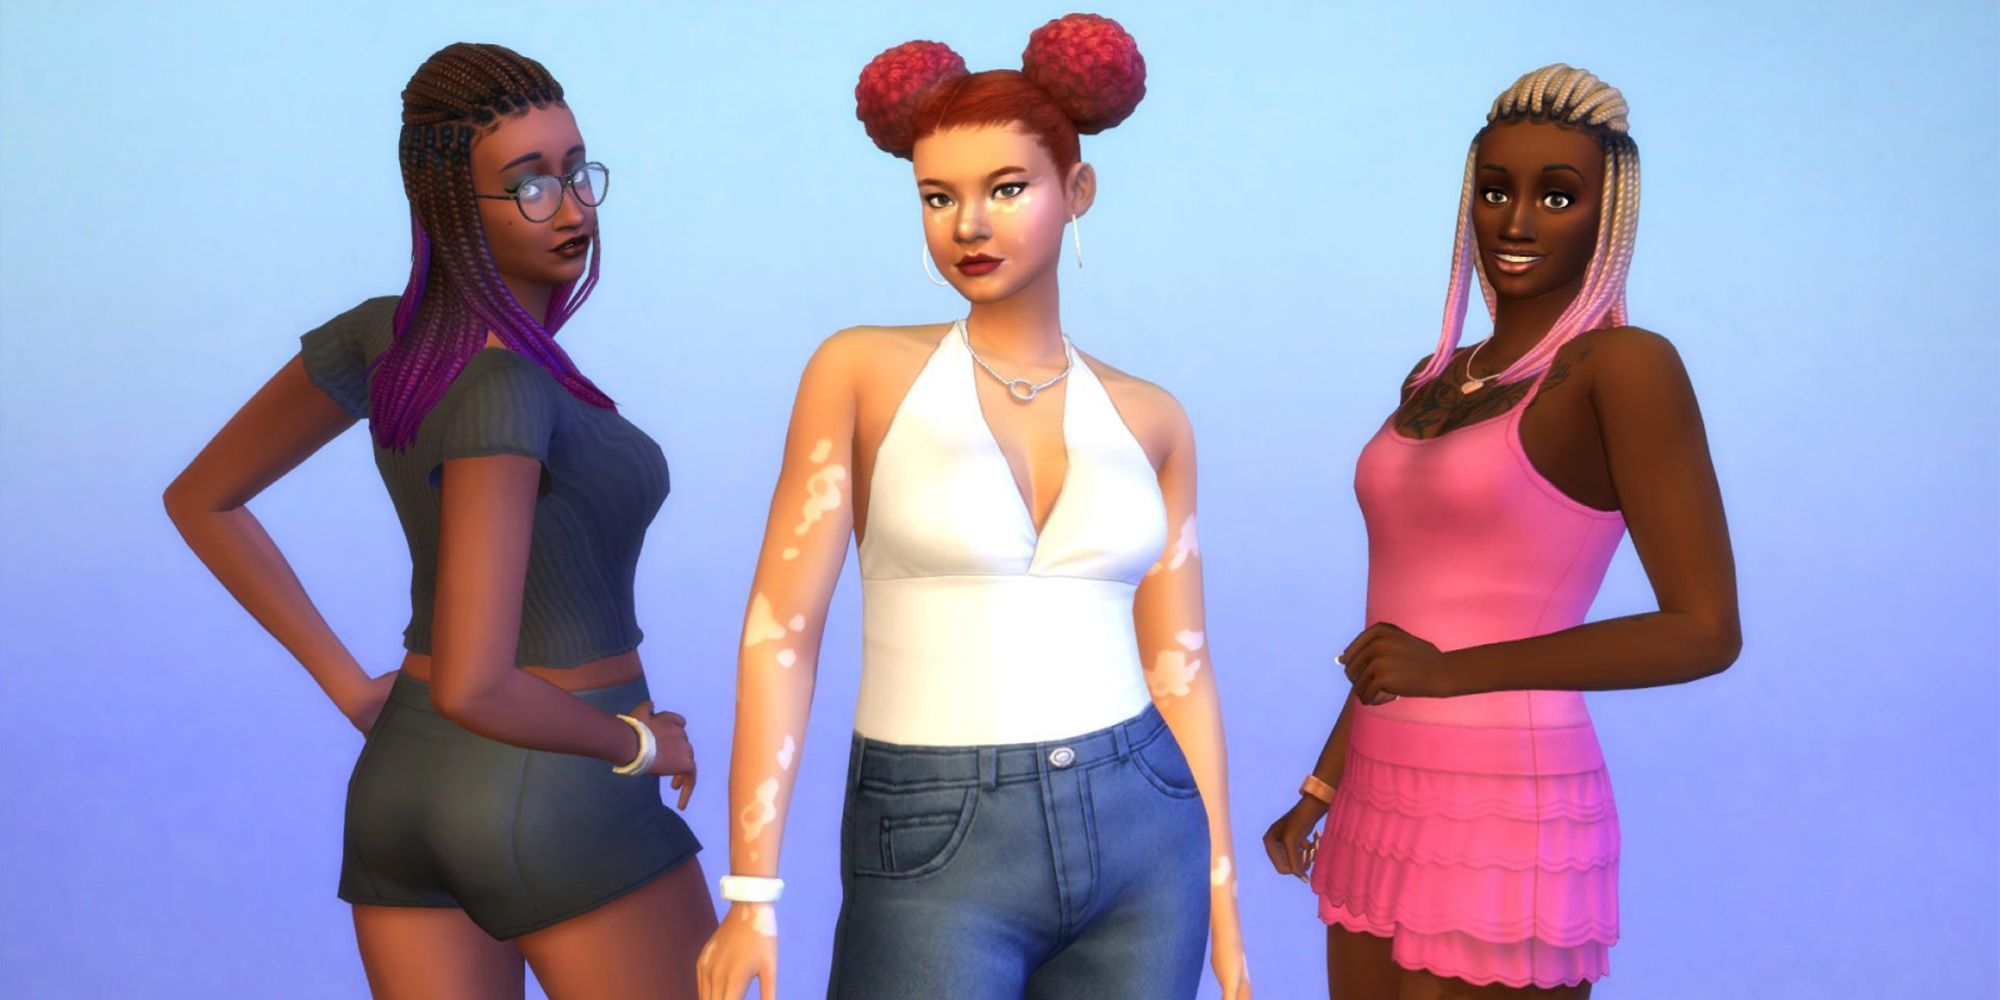 Three Sims standing together looking at the camera, the one on the left has black braids with purple tips and is wearing glasses and a black shirt and black shorts. The one in the middle has red hair and is wearing a white tank and blue jeans. The one on the right has blonde braids with pink tips and is wearing a pink dress.